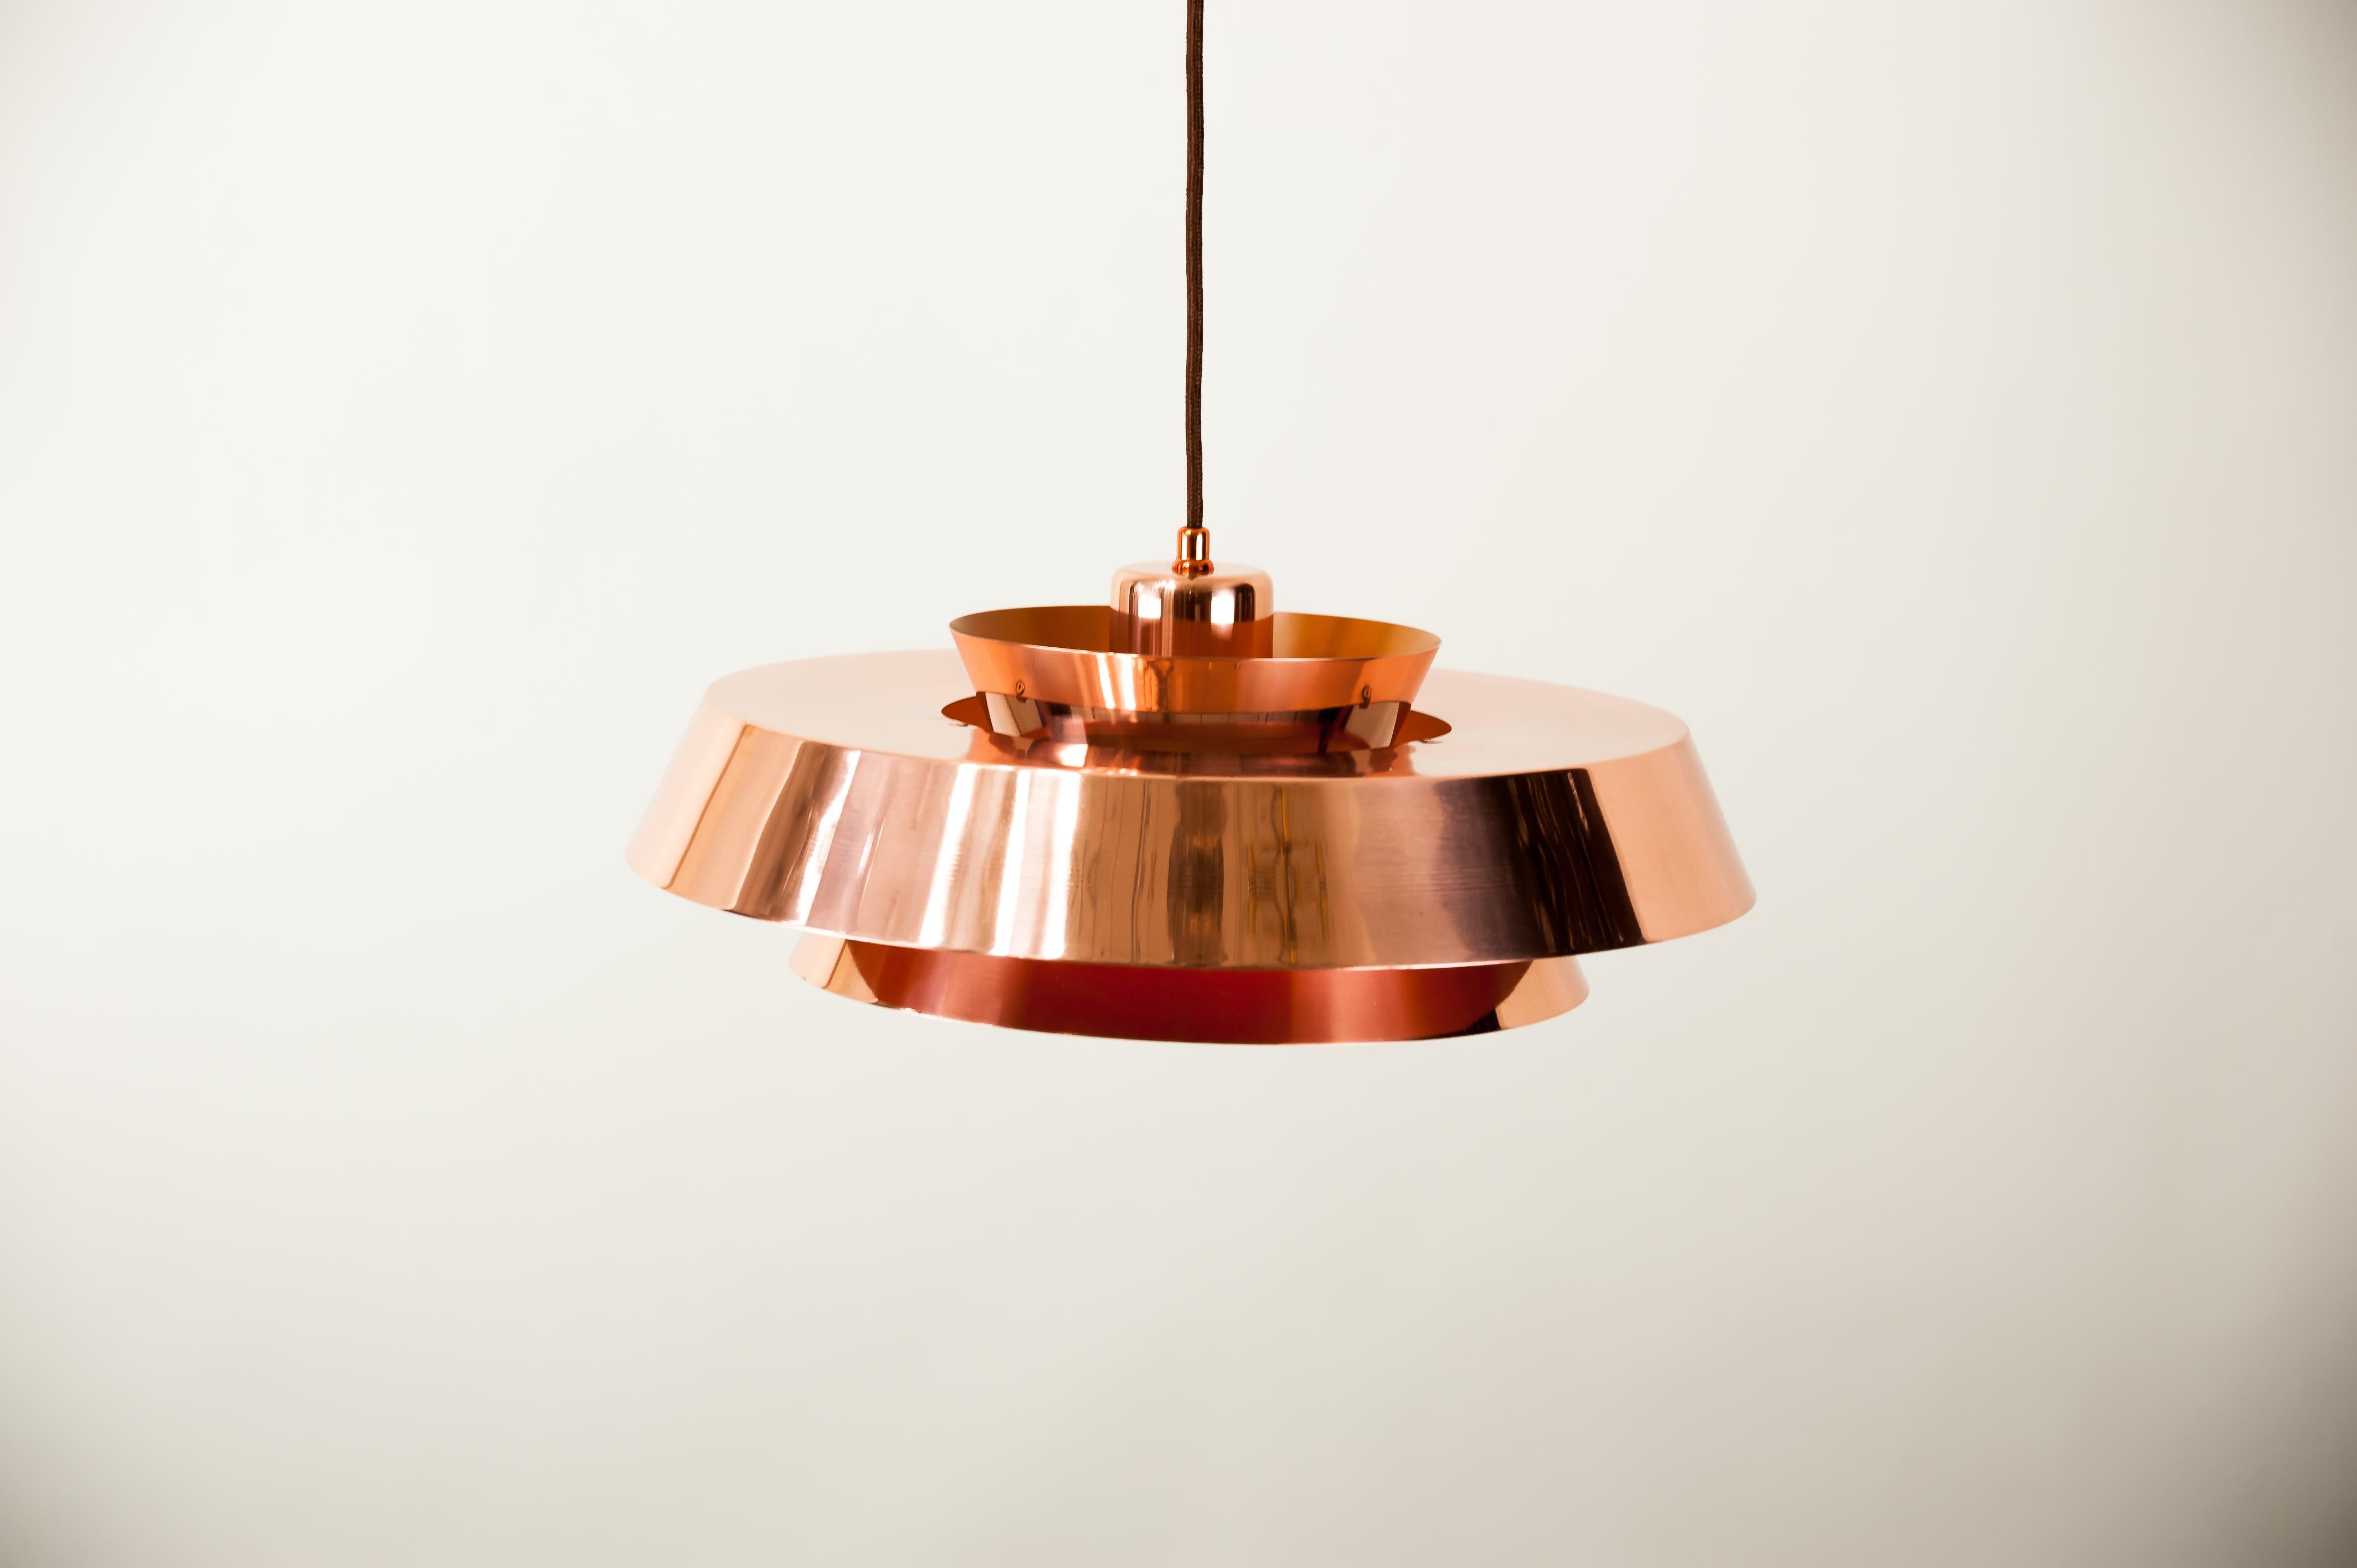 Jo Hammerborg Nova copper pendant for Fog & Mørup, 1960s.
Polished and stove enameled
We can arrange to adjust the height of this impressive chandelier to any length you wish as a free service.